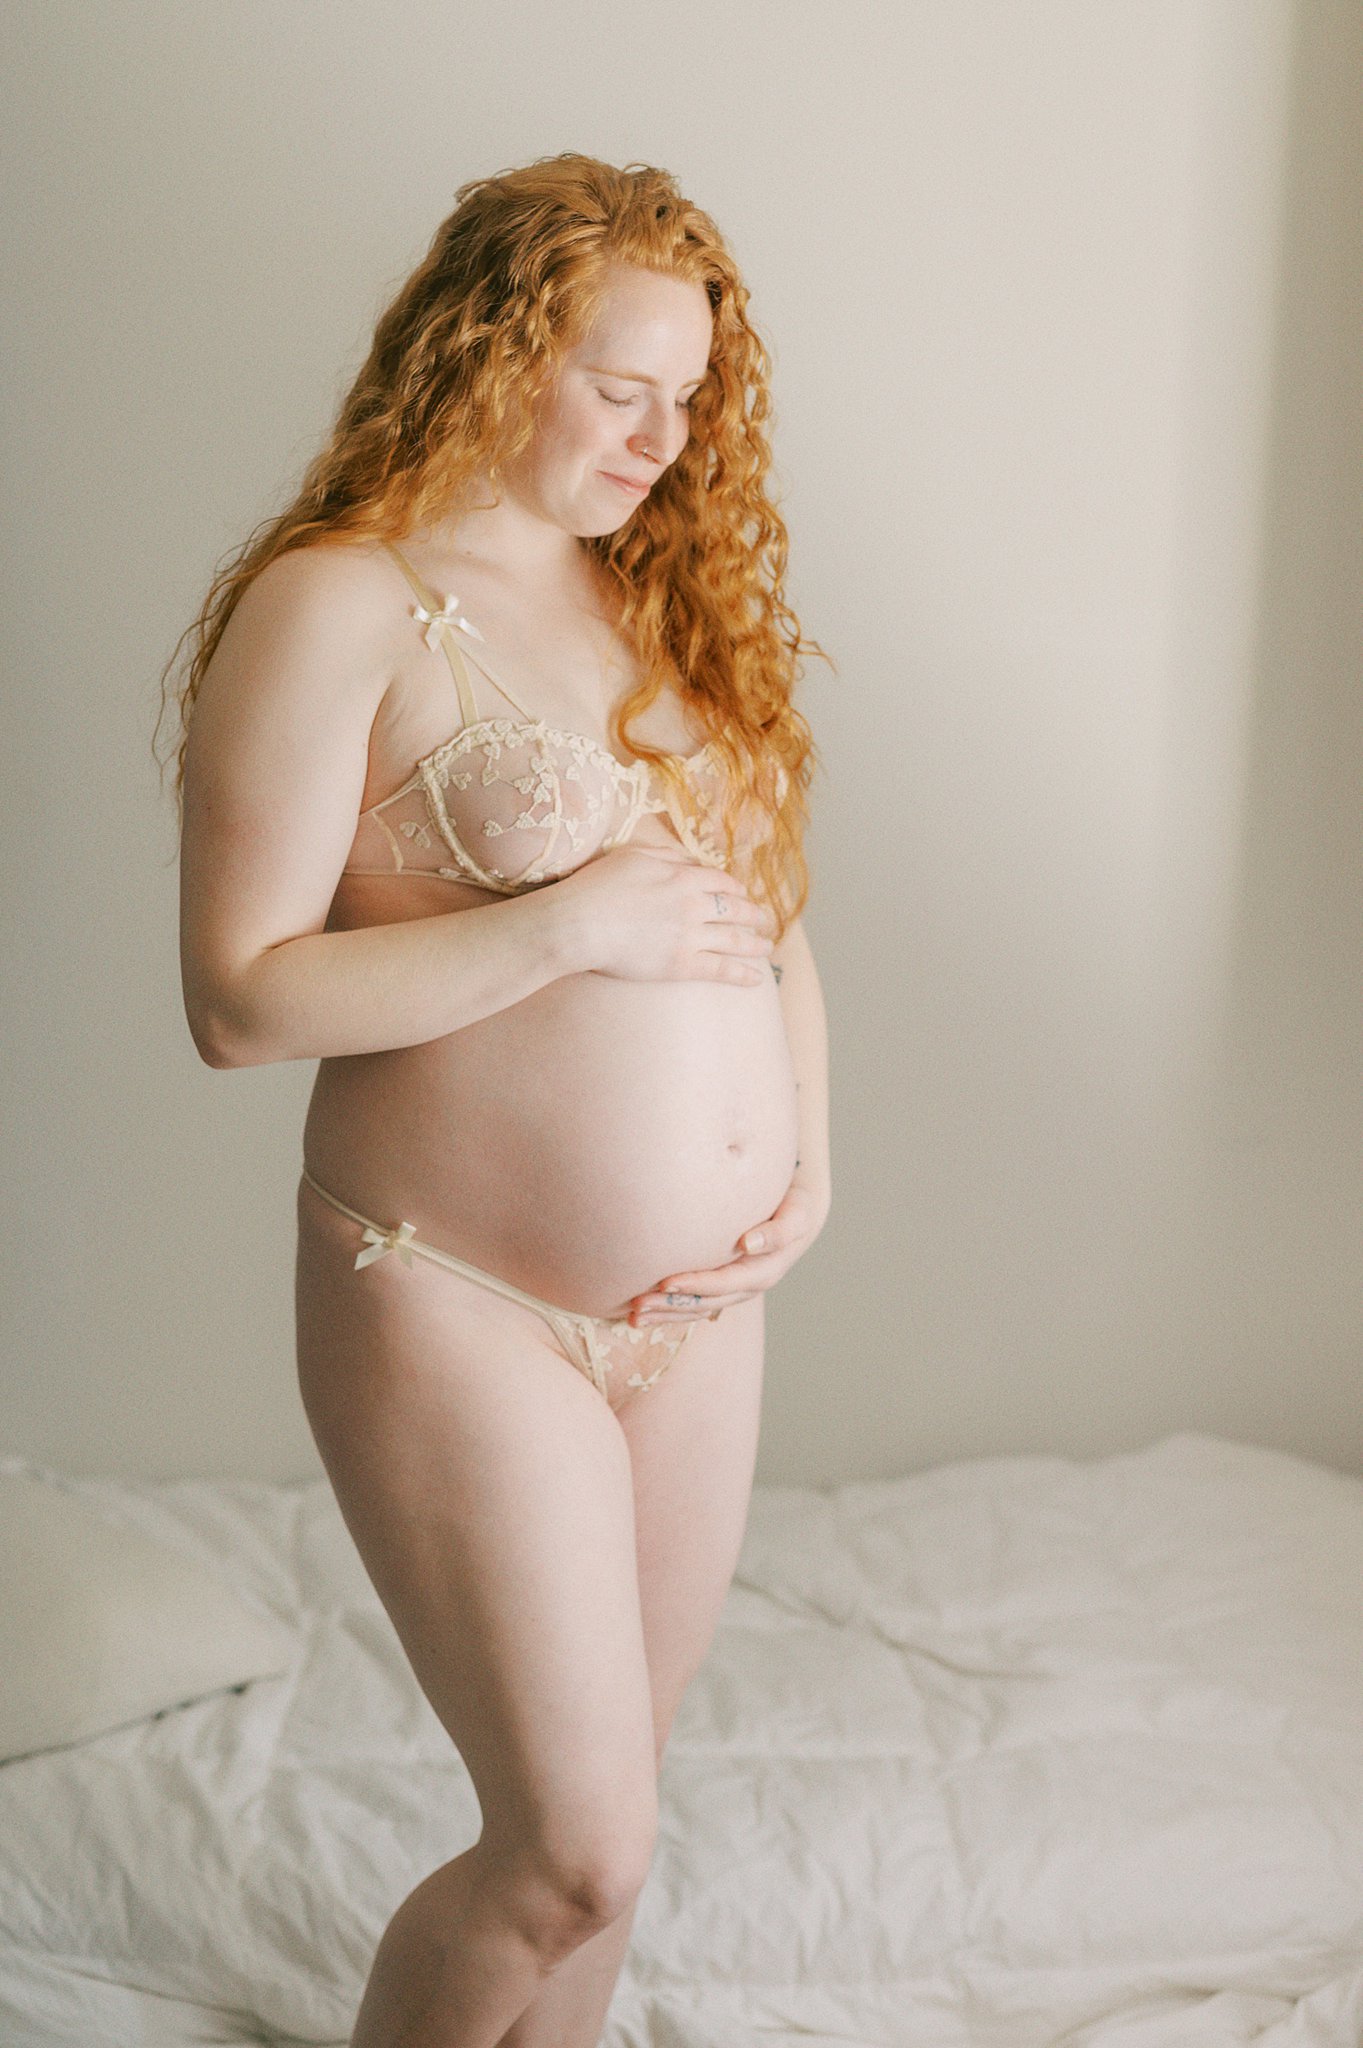 A pregnant woman looks down at her bump while standing in lace lingerie Seattle Botox